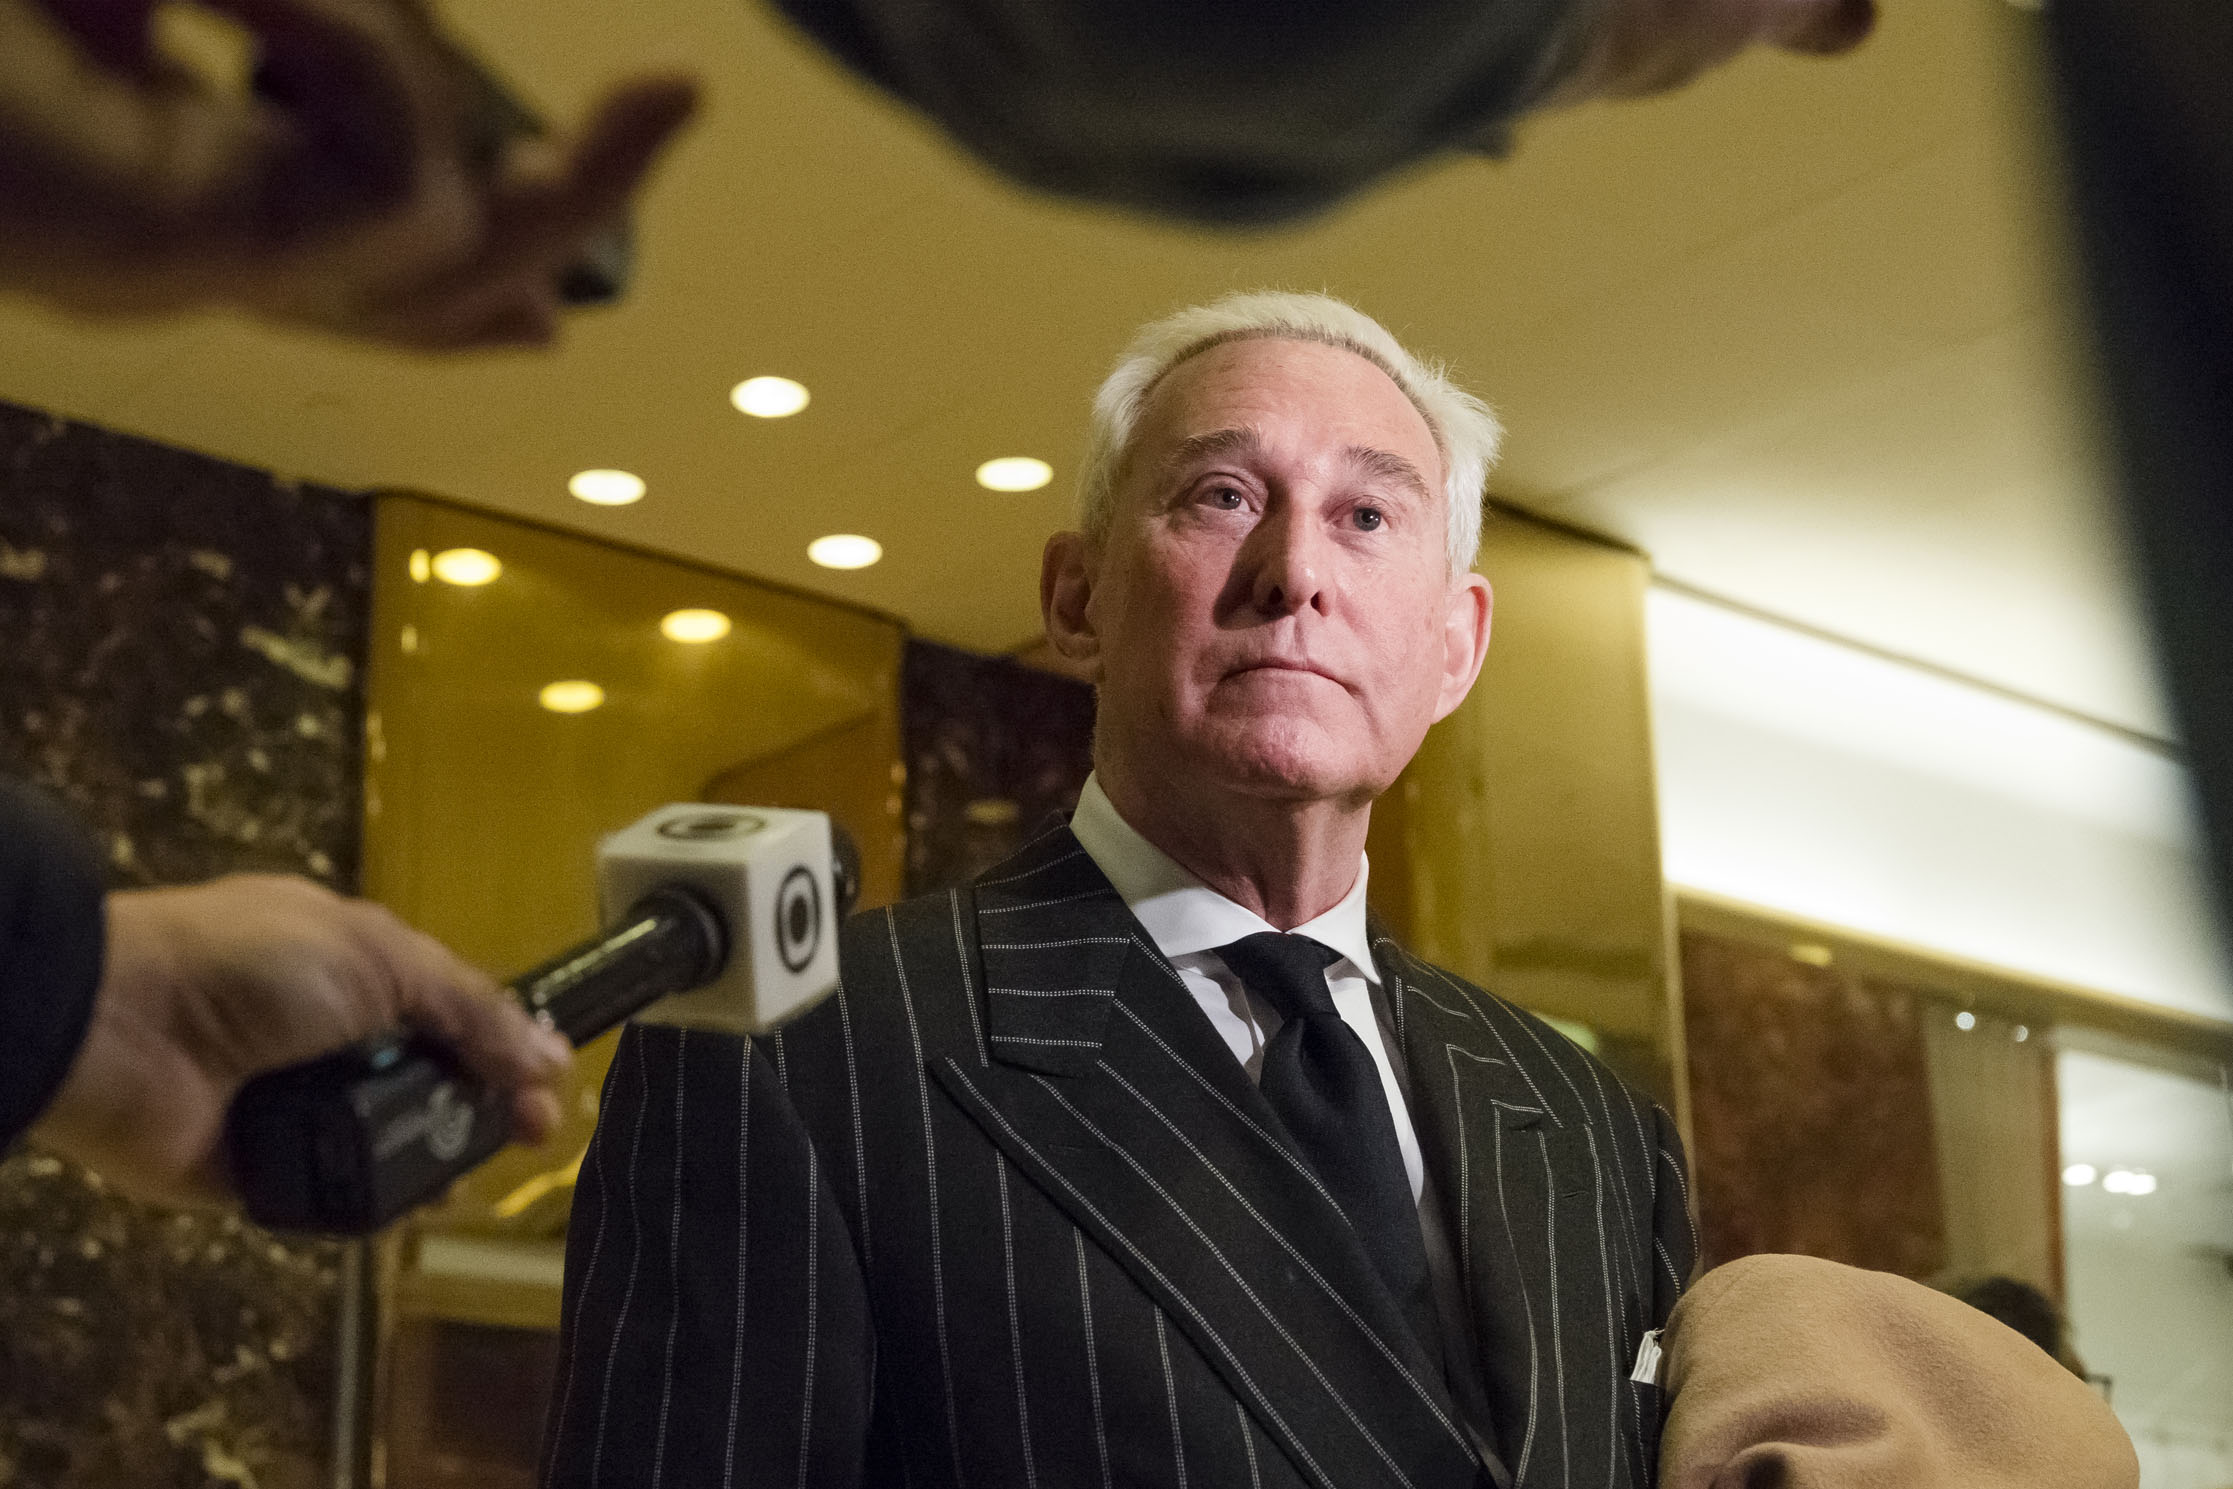 Roger Stone speaks in the lobby of Trump Tower in 2016. (Albin Lohr-Jones) (Albin Lohr-Jones—Albin Lohr-Jones/picture-allianc)